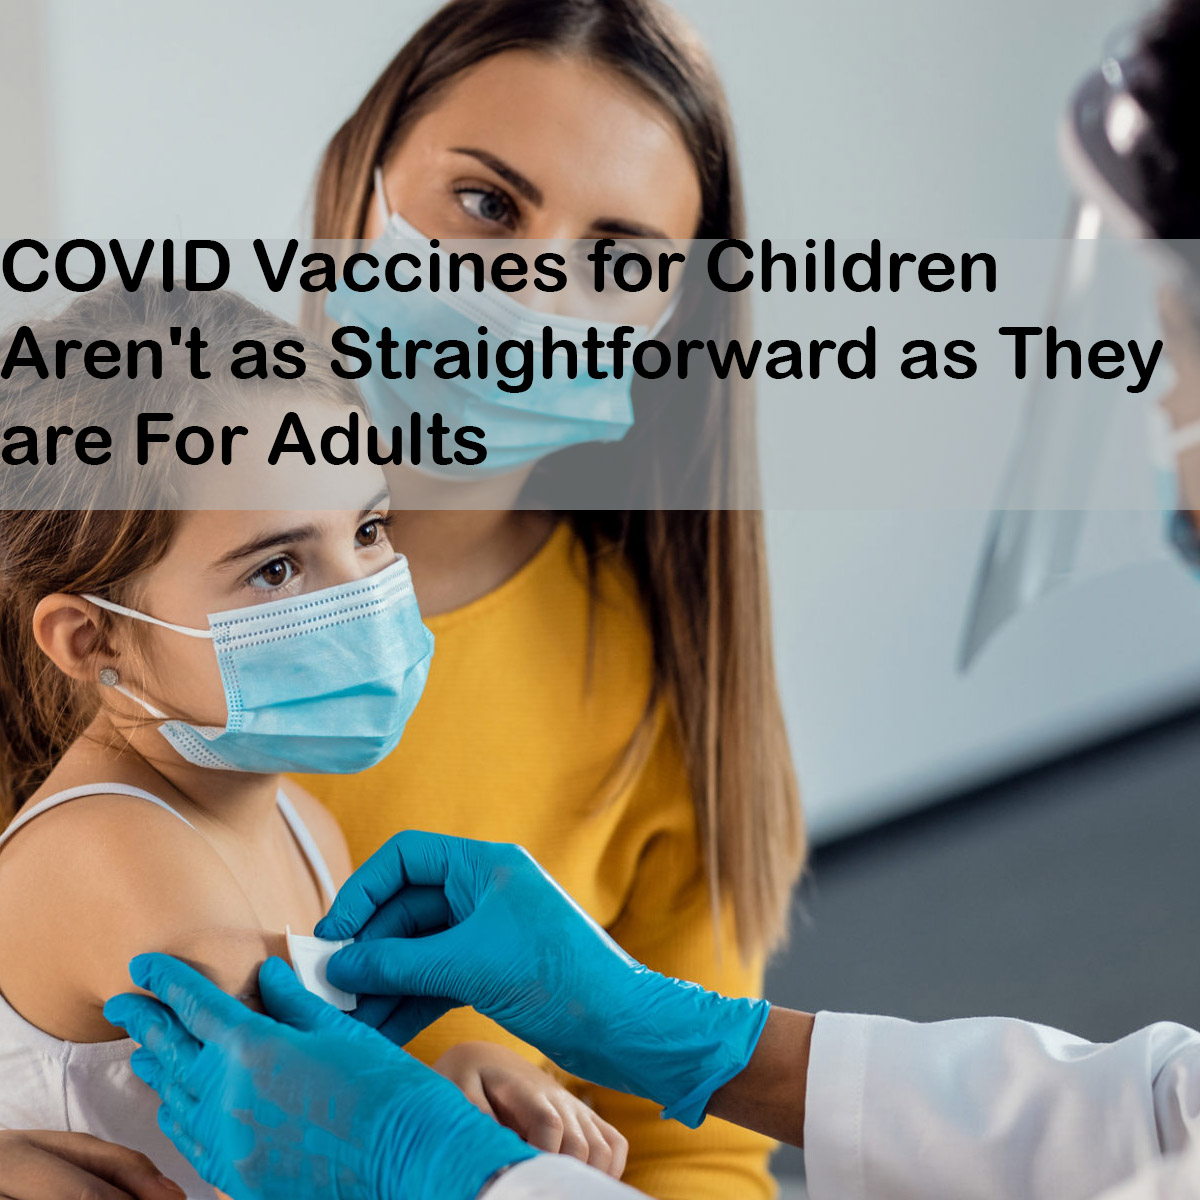 COVID Vaccines for Children Aren't as Straightforward as They are For Adults